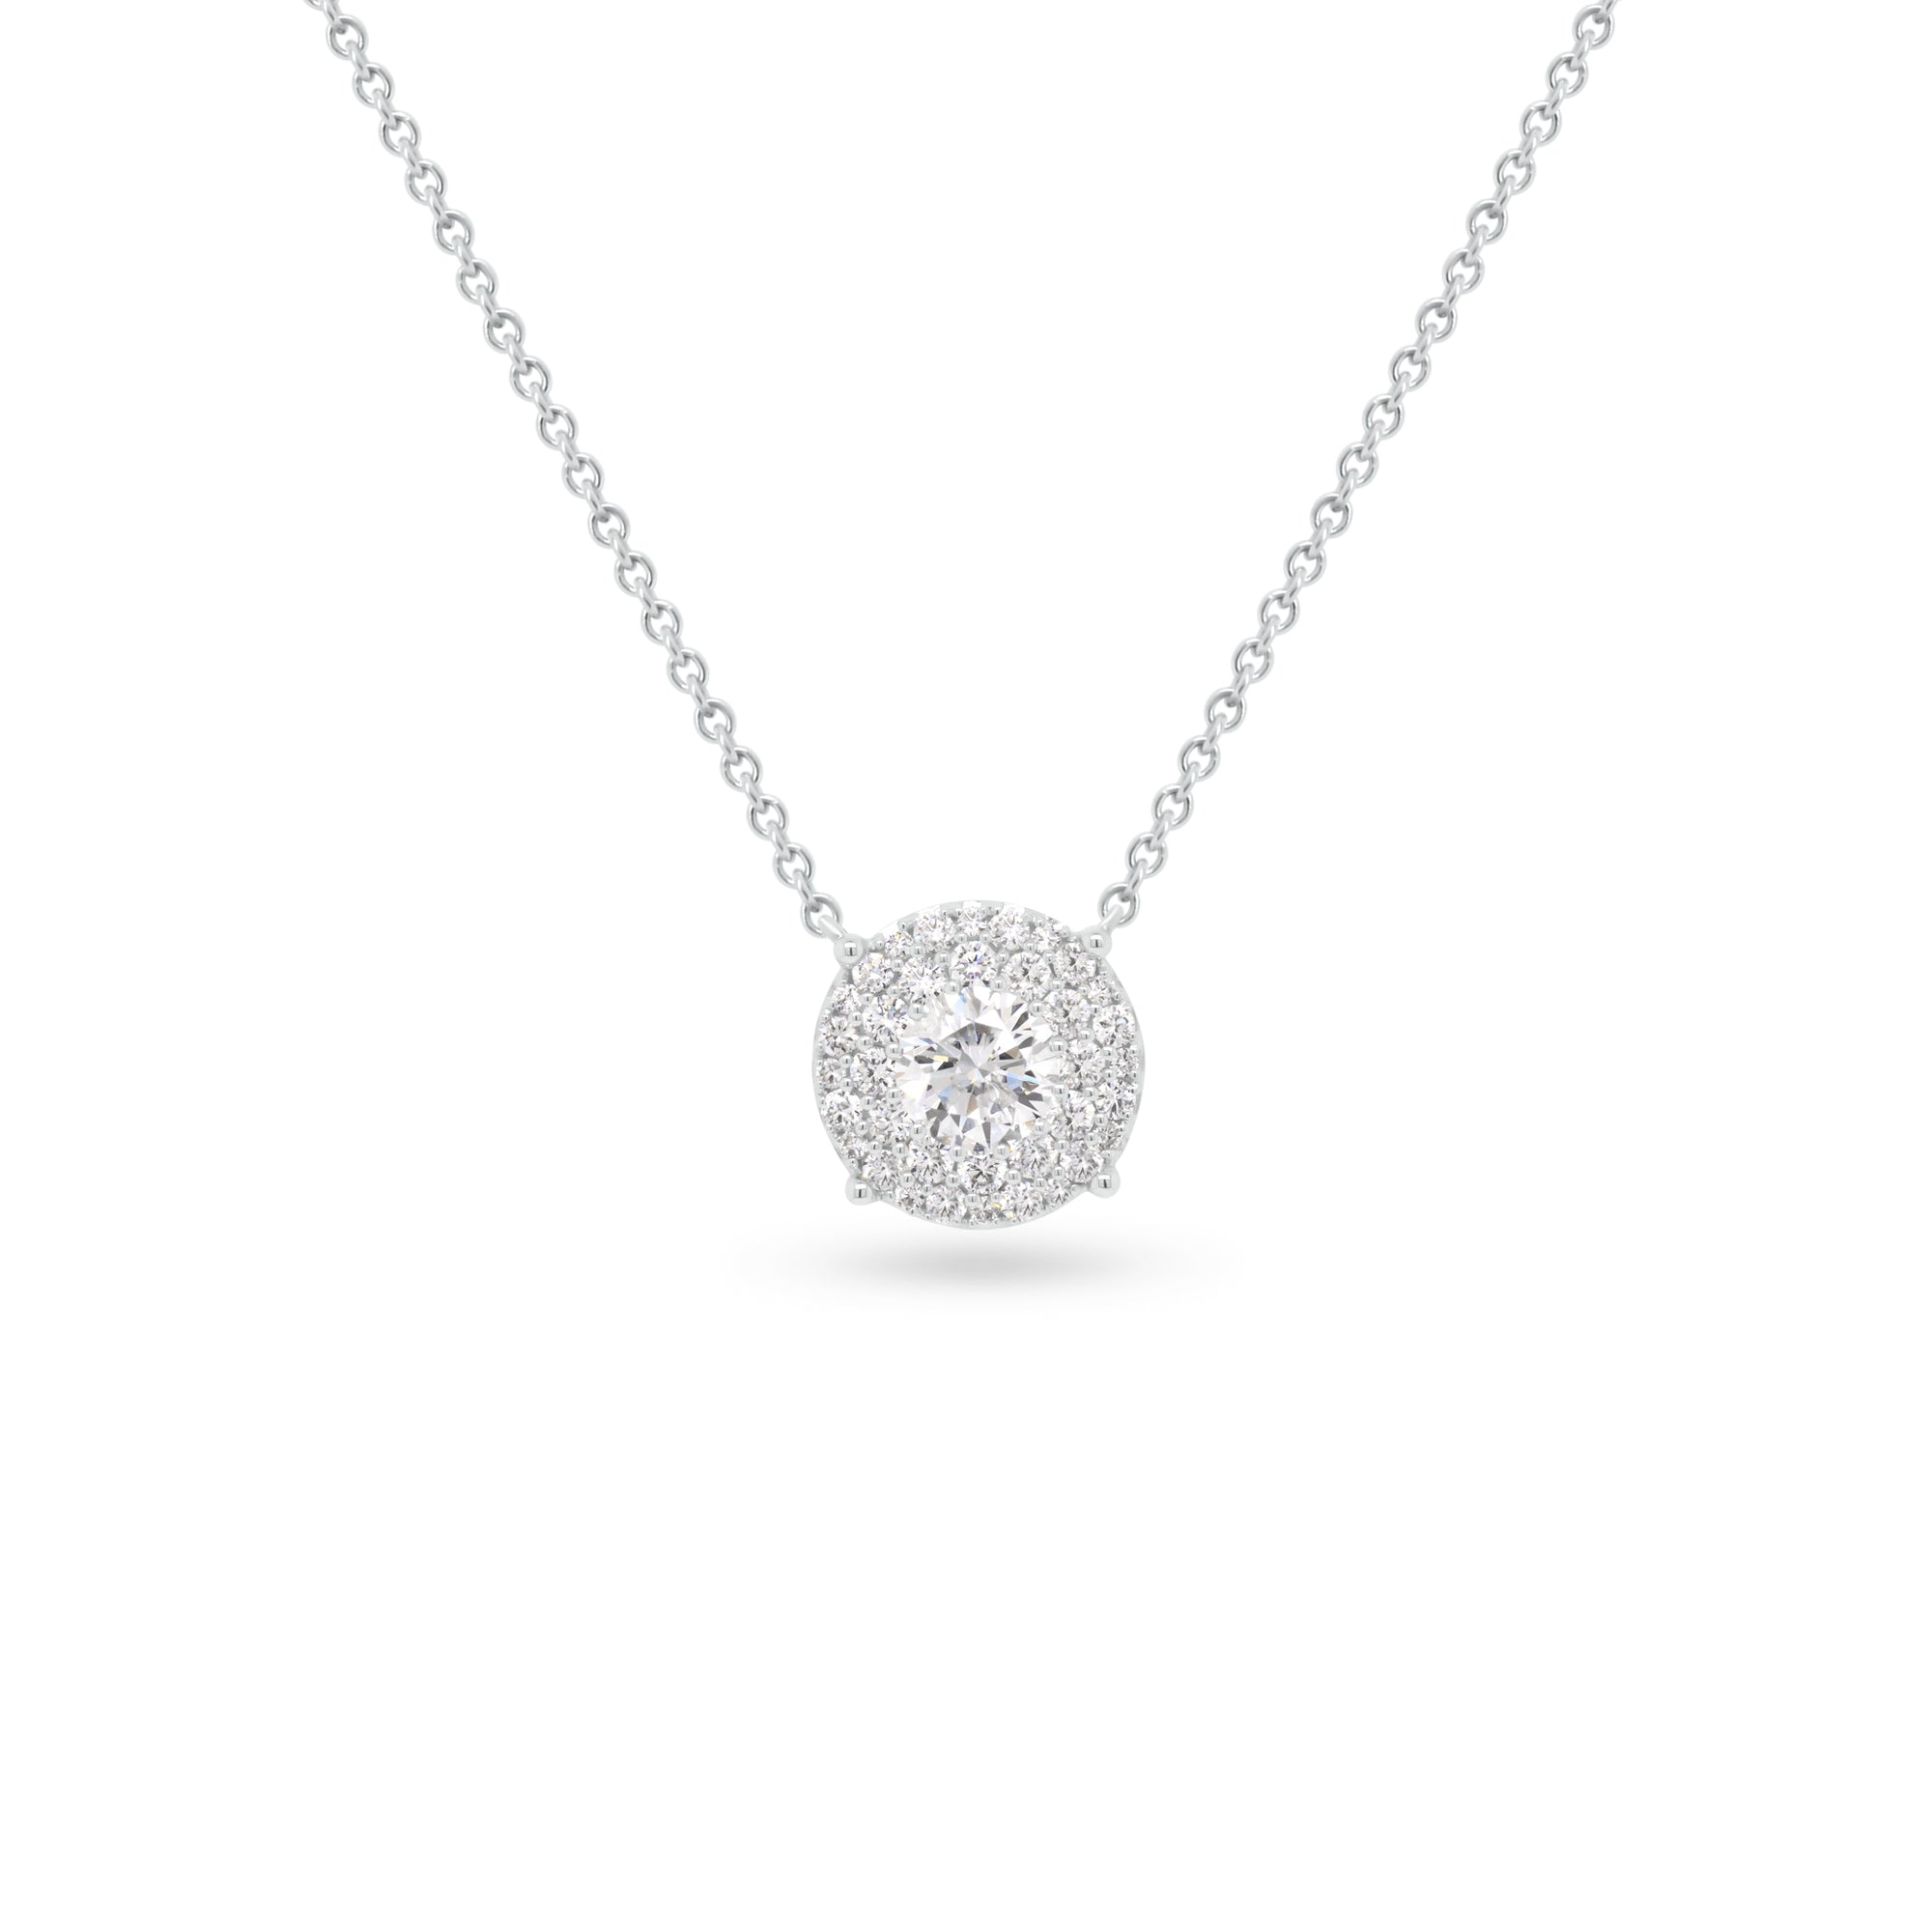 Diamond Double Halo Pendant Necklace  -18K white gold weighing 4.25 grams  -30 round pave-set diamonds totaling 0.48 carats